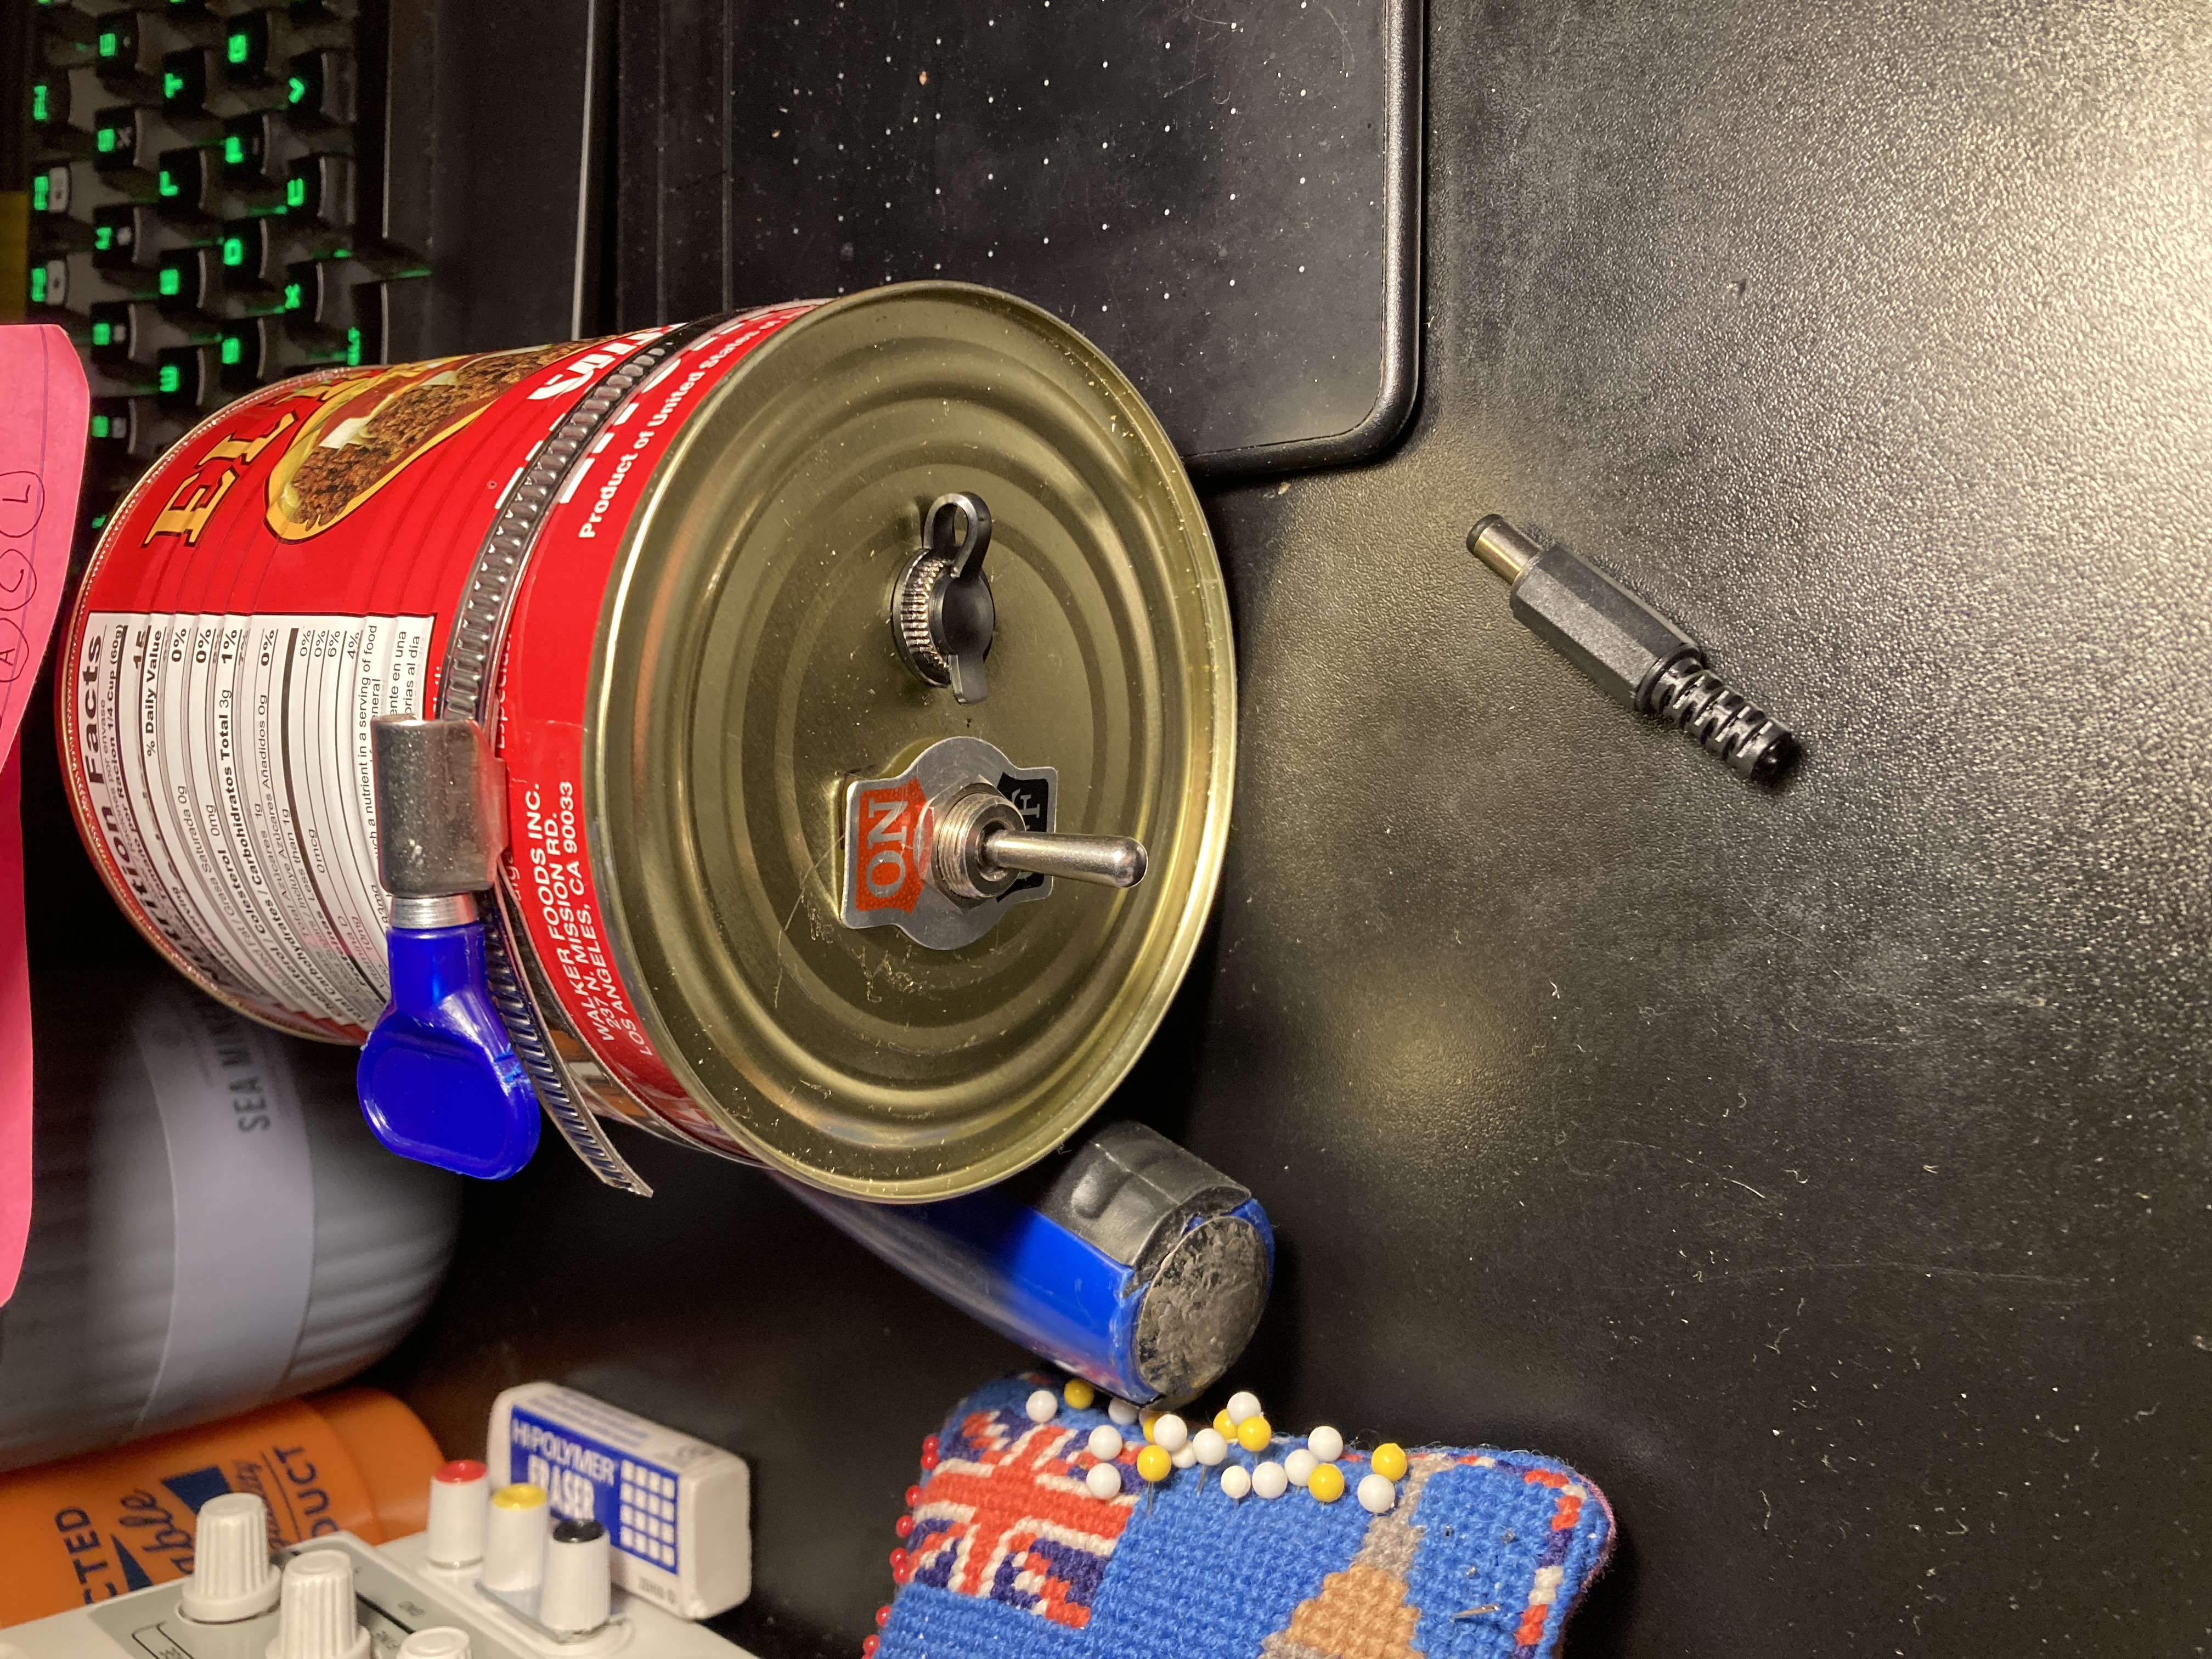 the flat bottom of the can, with a toggle switch and barrel port protruding through it